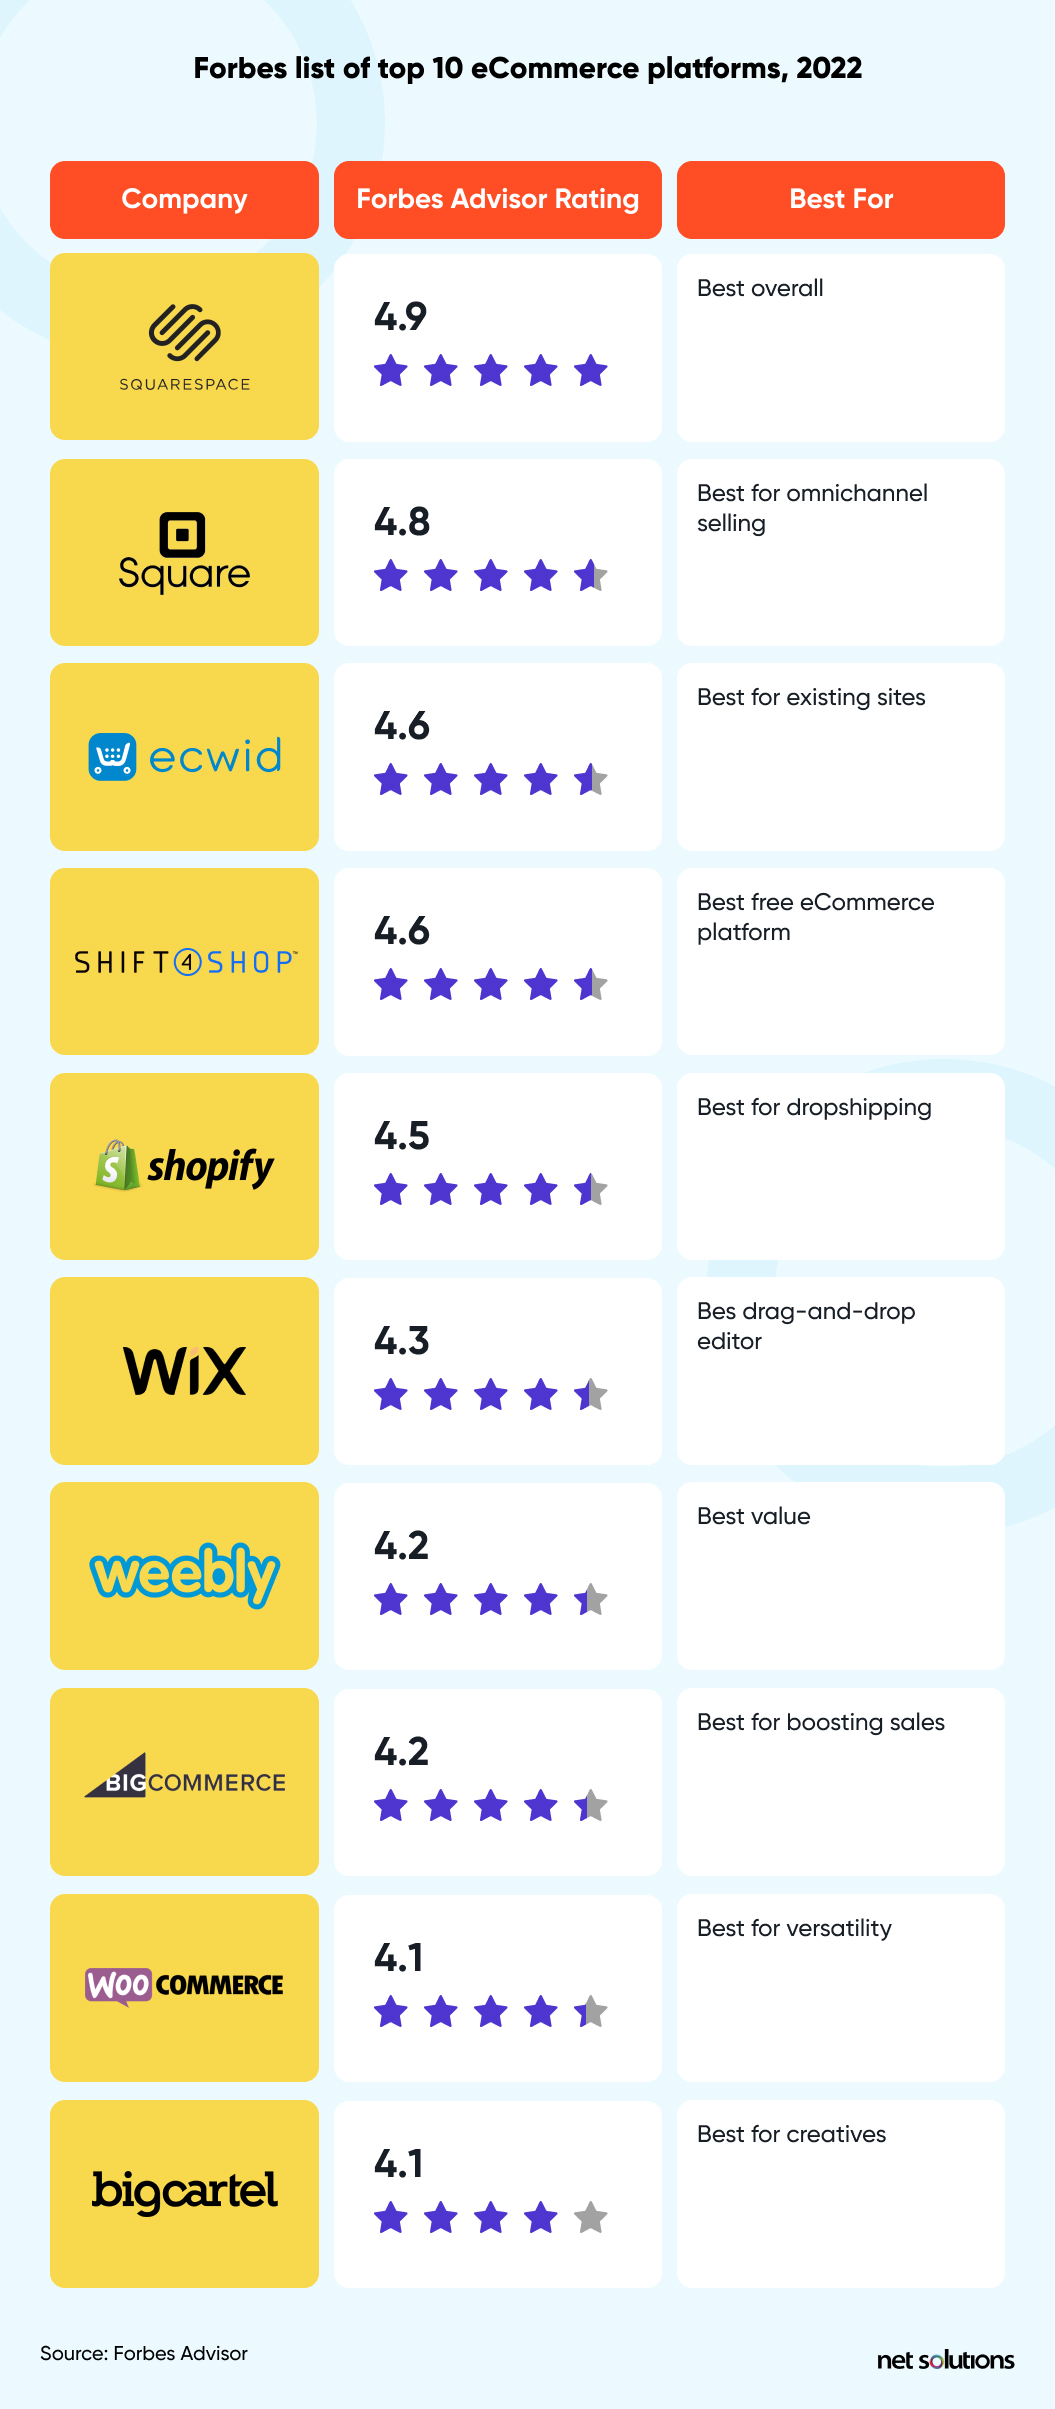 forbes top ecommerce platforms